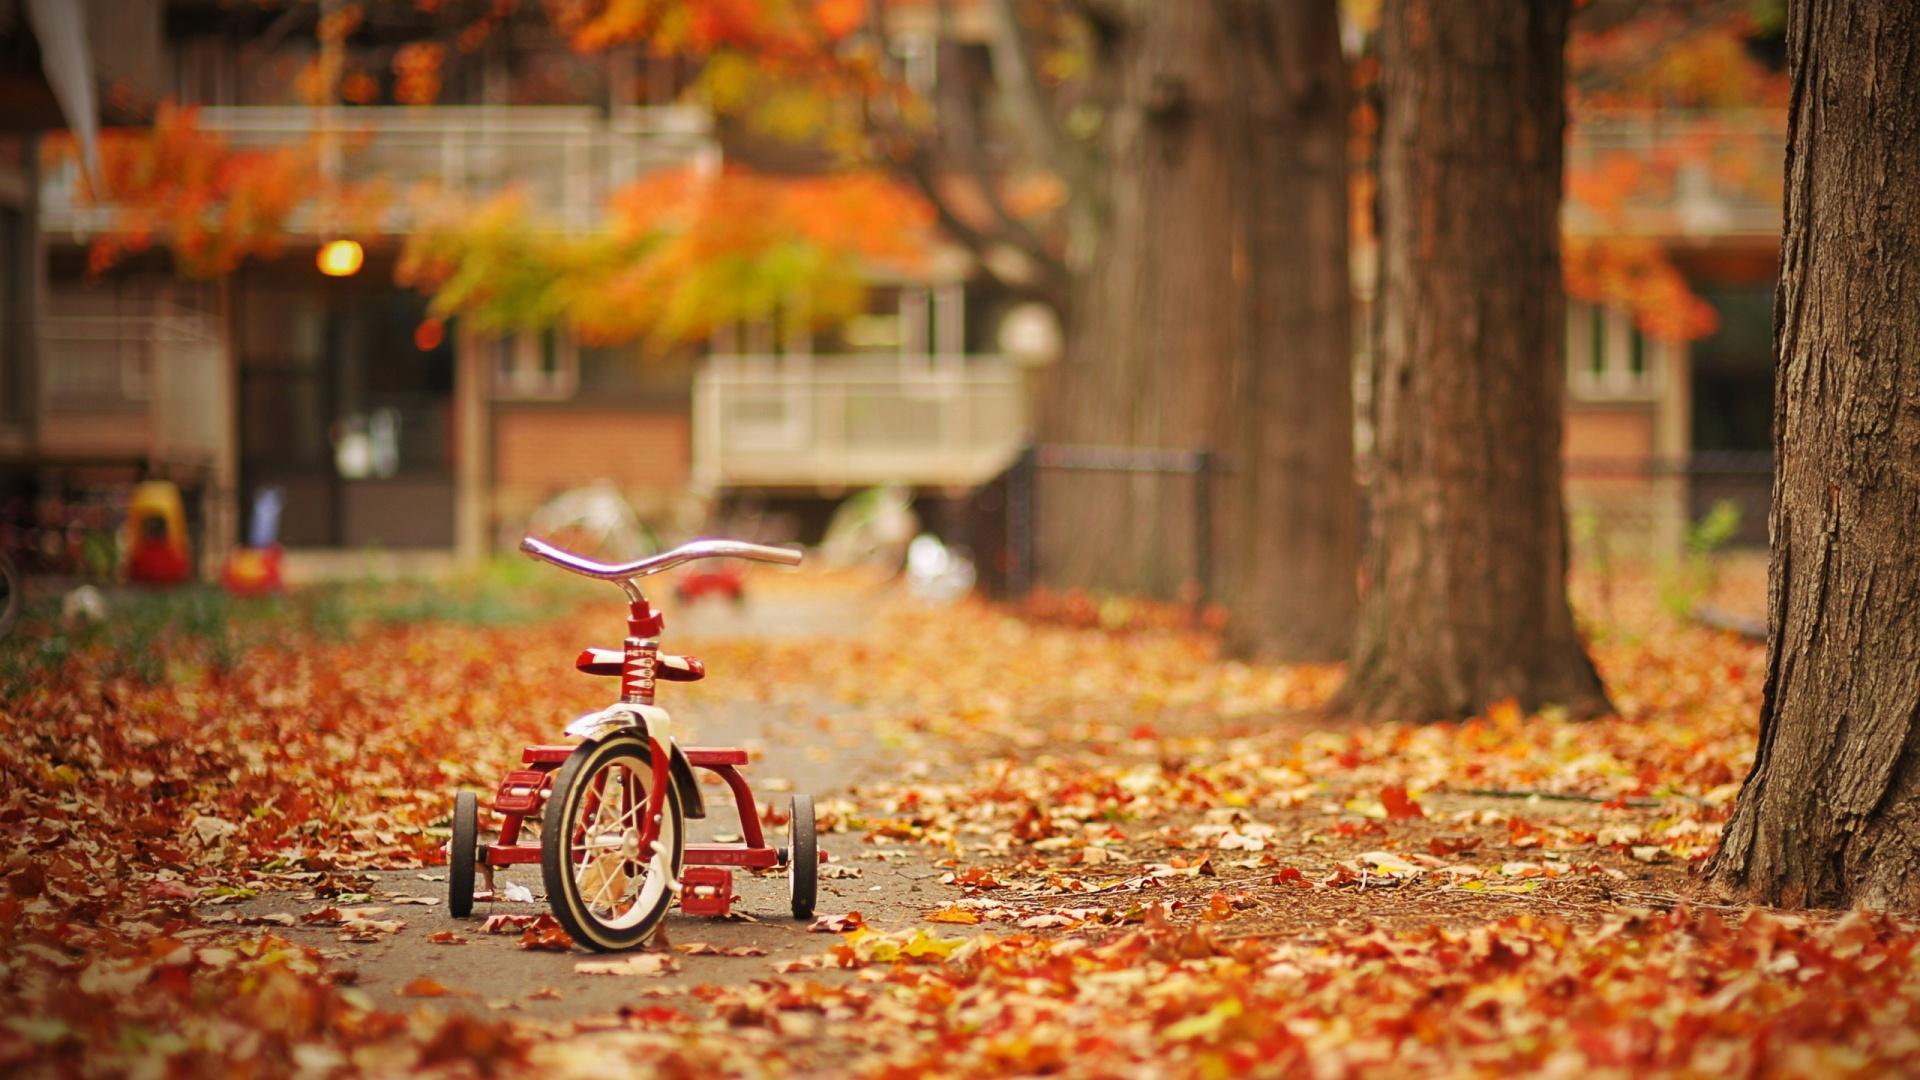 Free 1920x1080 Nature Autumn Leaves Tricycle Wallpaper Full HD